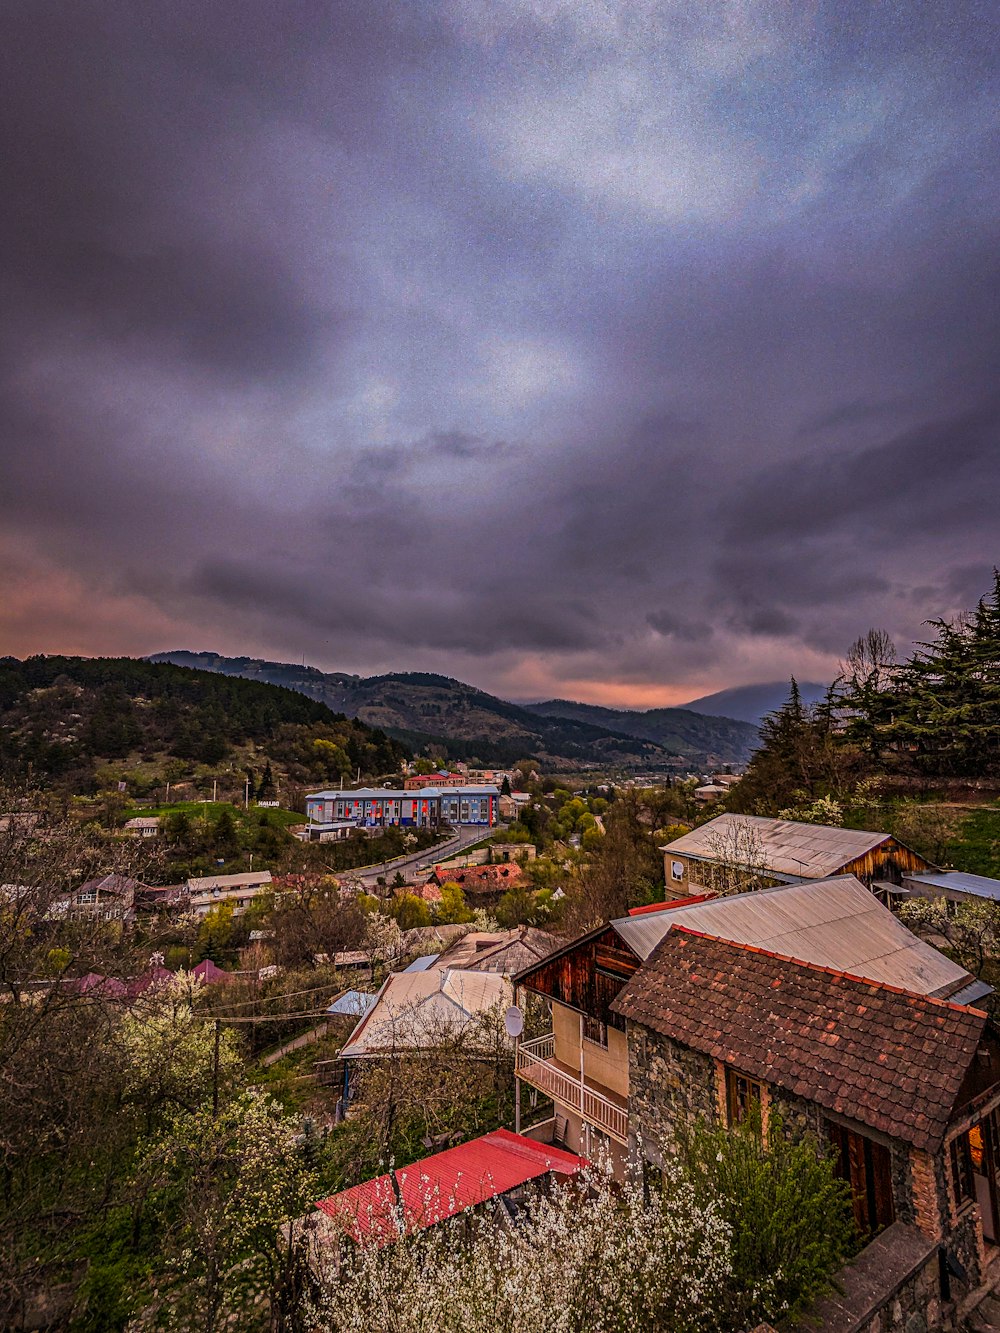 a cloudy sky over a small town with mountains in the background